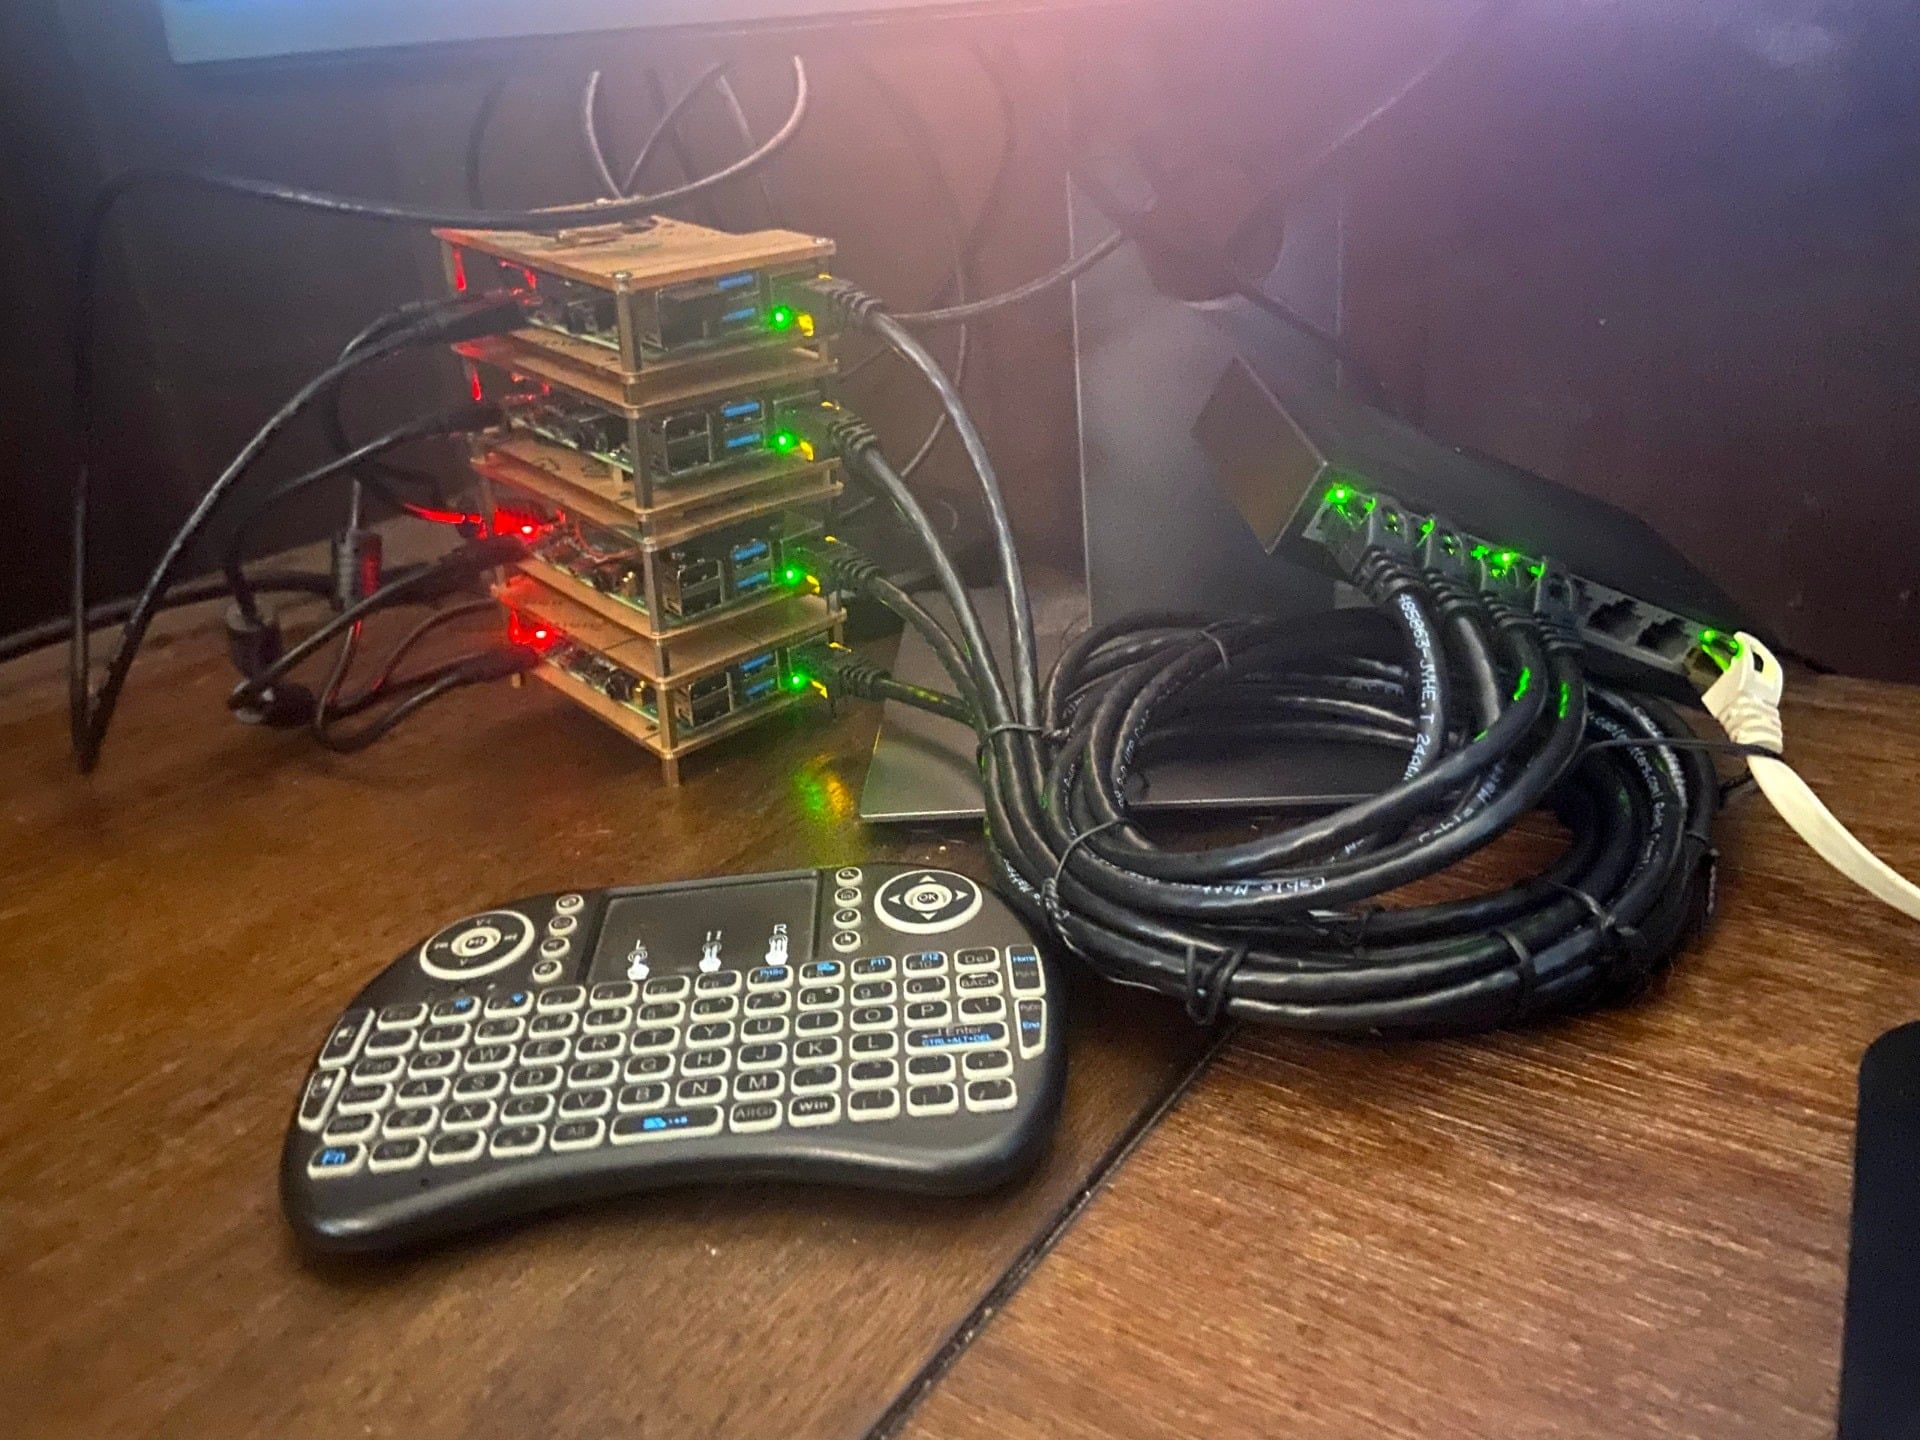 Raspberry Pi 4 Tower - Completed - Connected